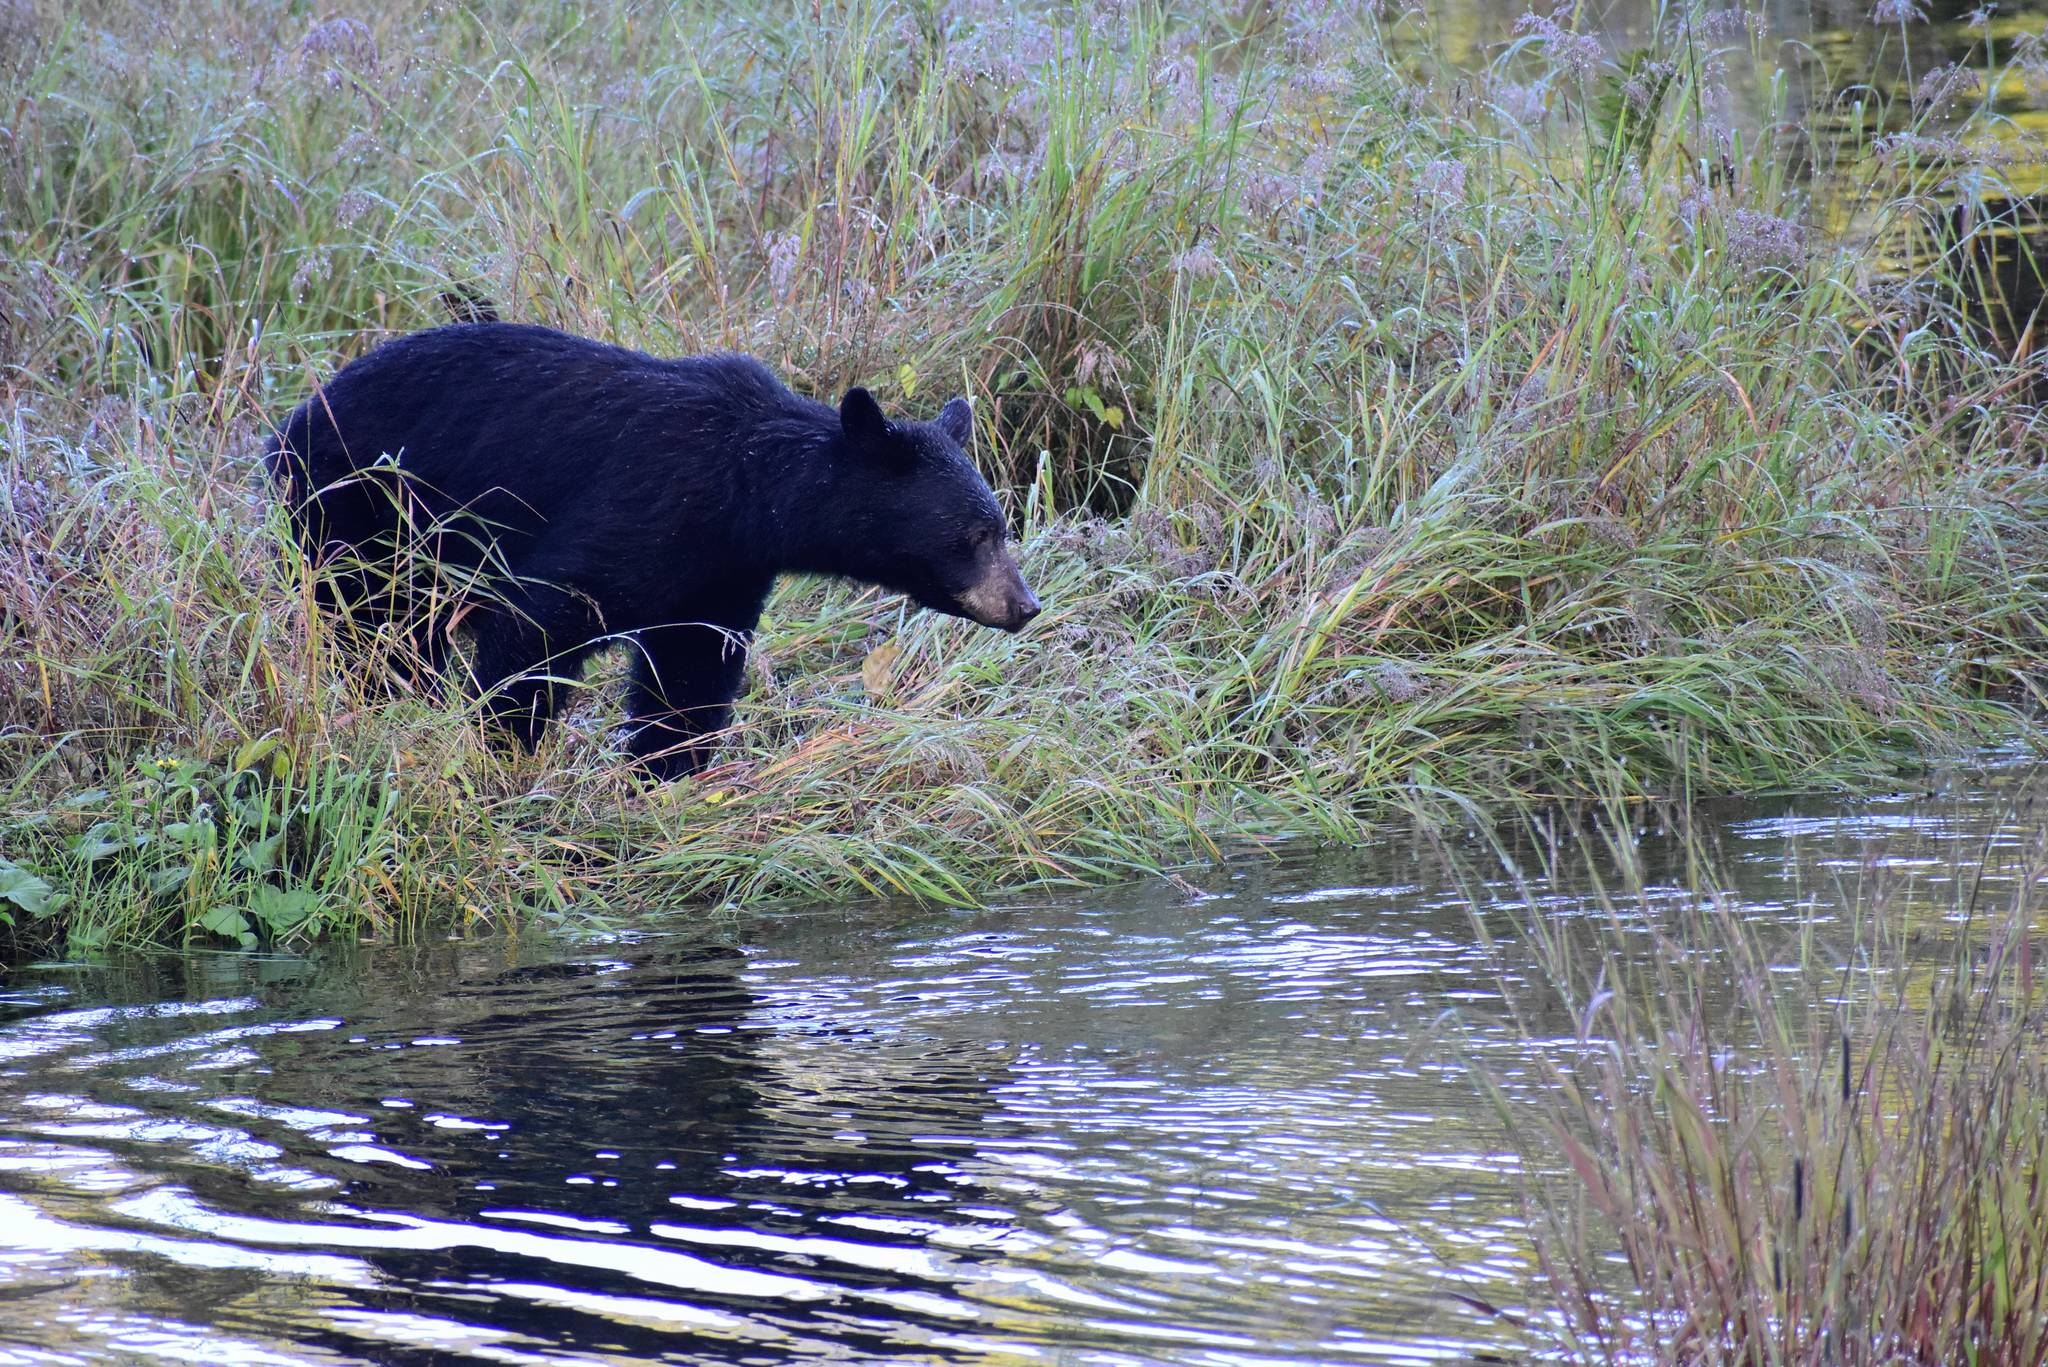 Peter Segall / Juneau Empire 
Bears, like this one looking for fish in a stream along the Steep Creek Trail at the Mendenhall Glacier Visitor Center on Aug. 22, 2020, have been sleeping through the winter but they’re waking up and experts want residents to be prepared.